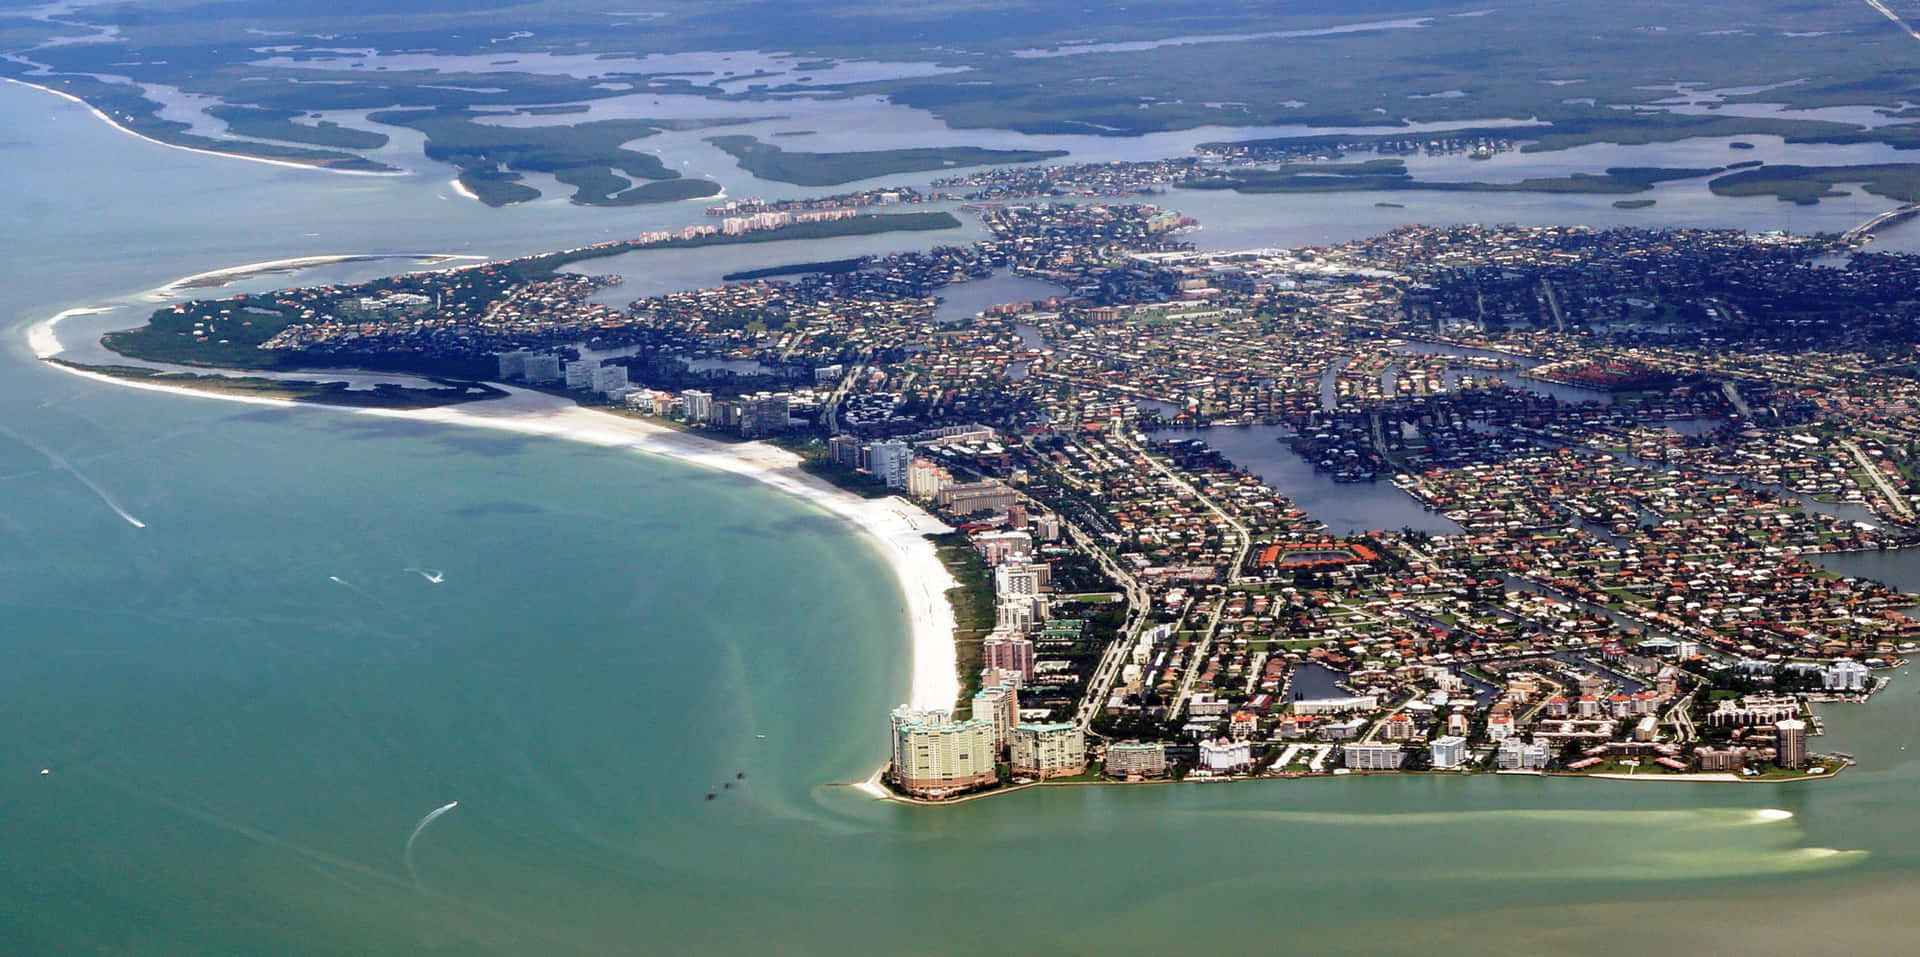 Relax and Unwind in Paradise on Marco Island